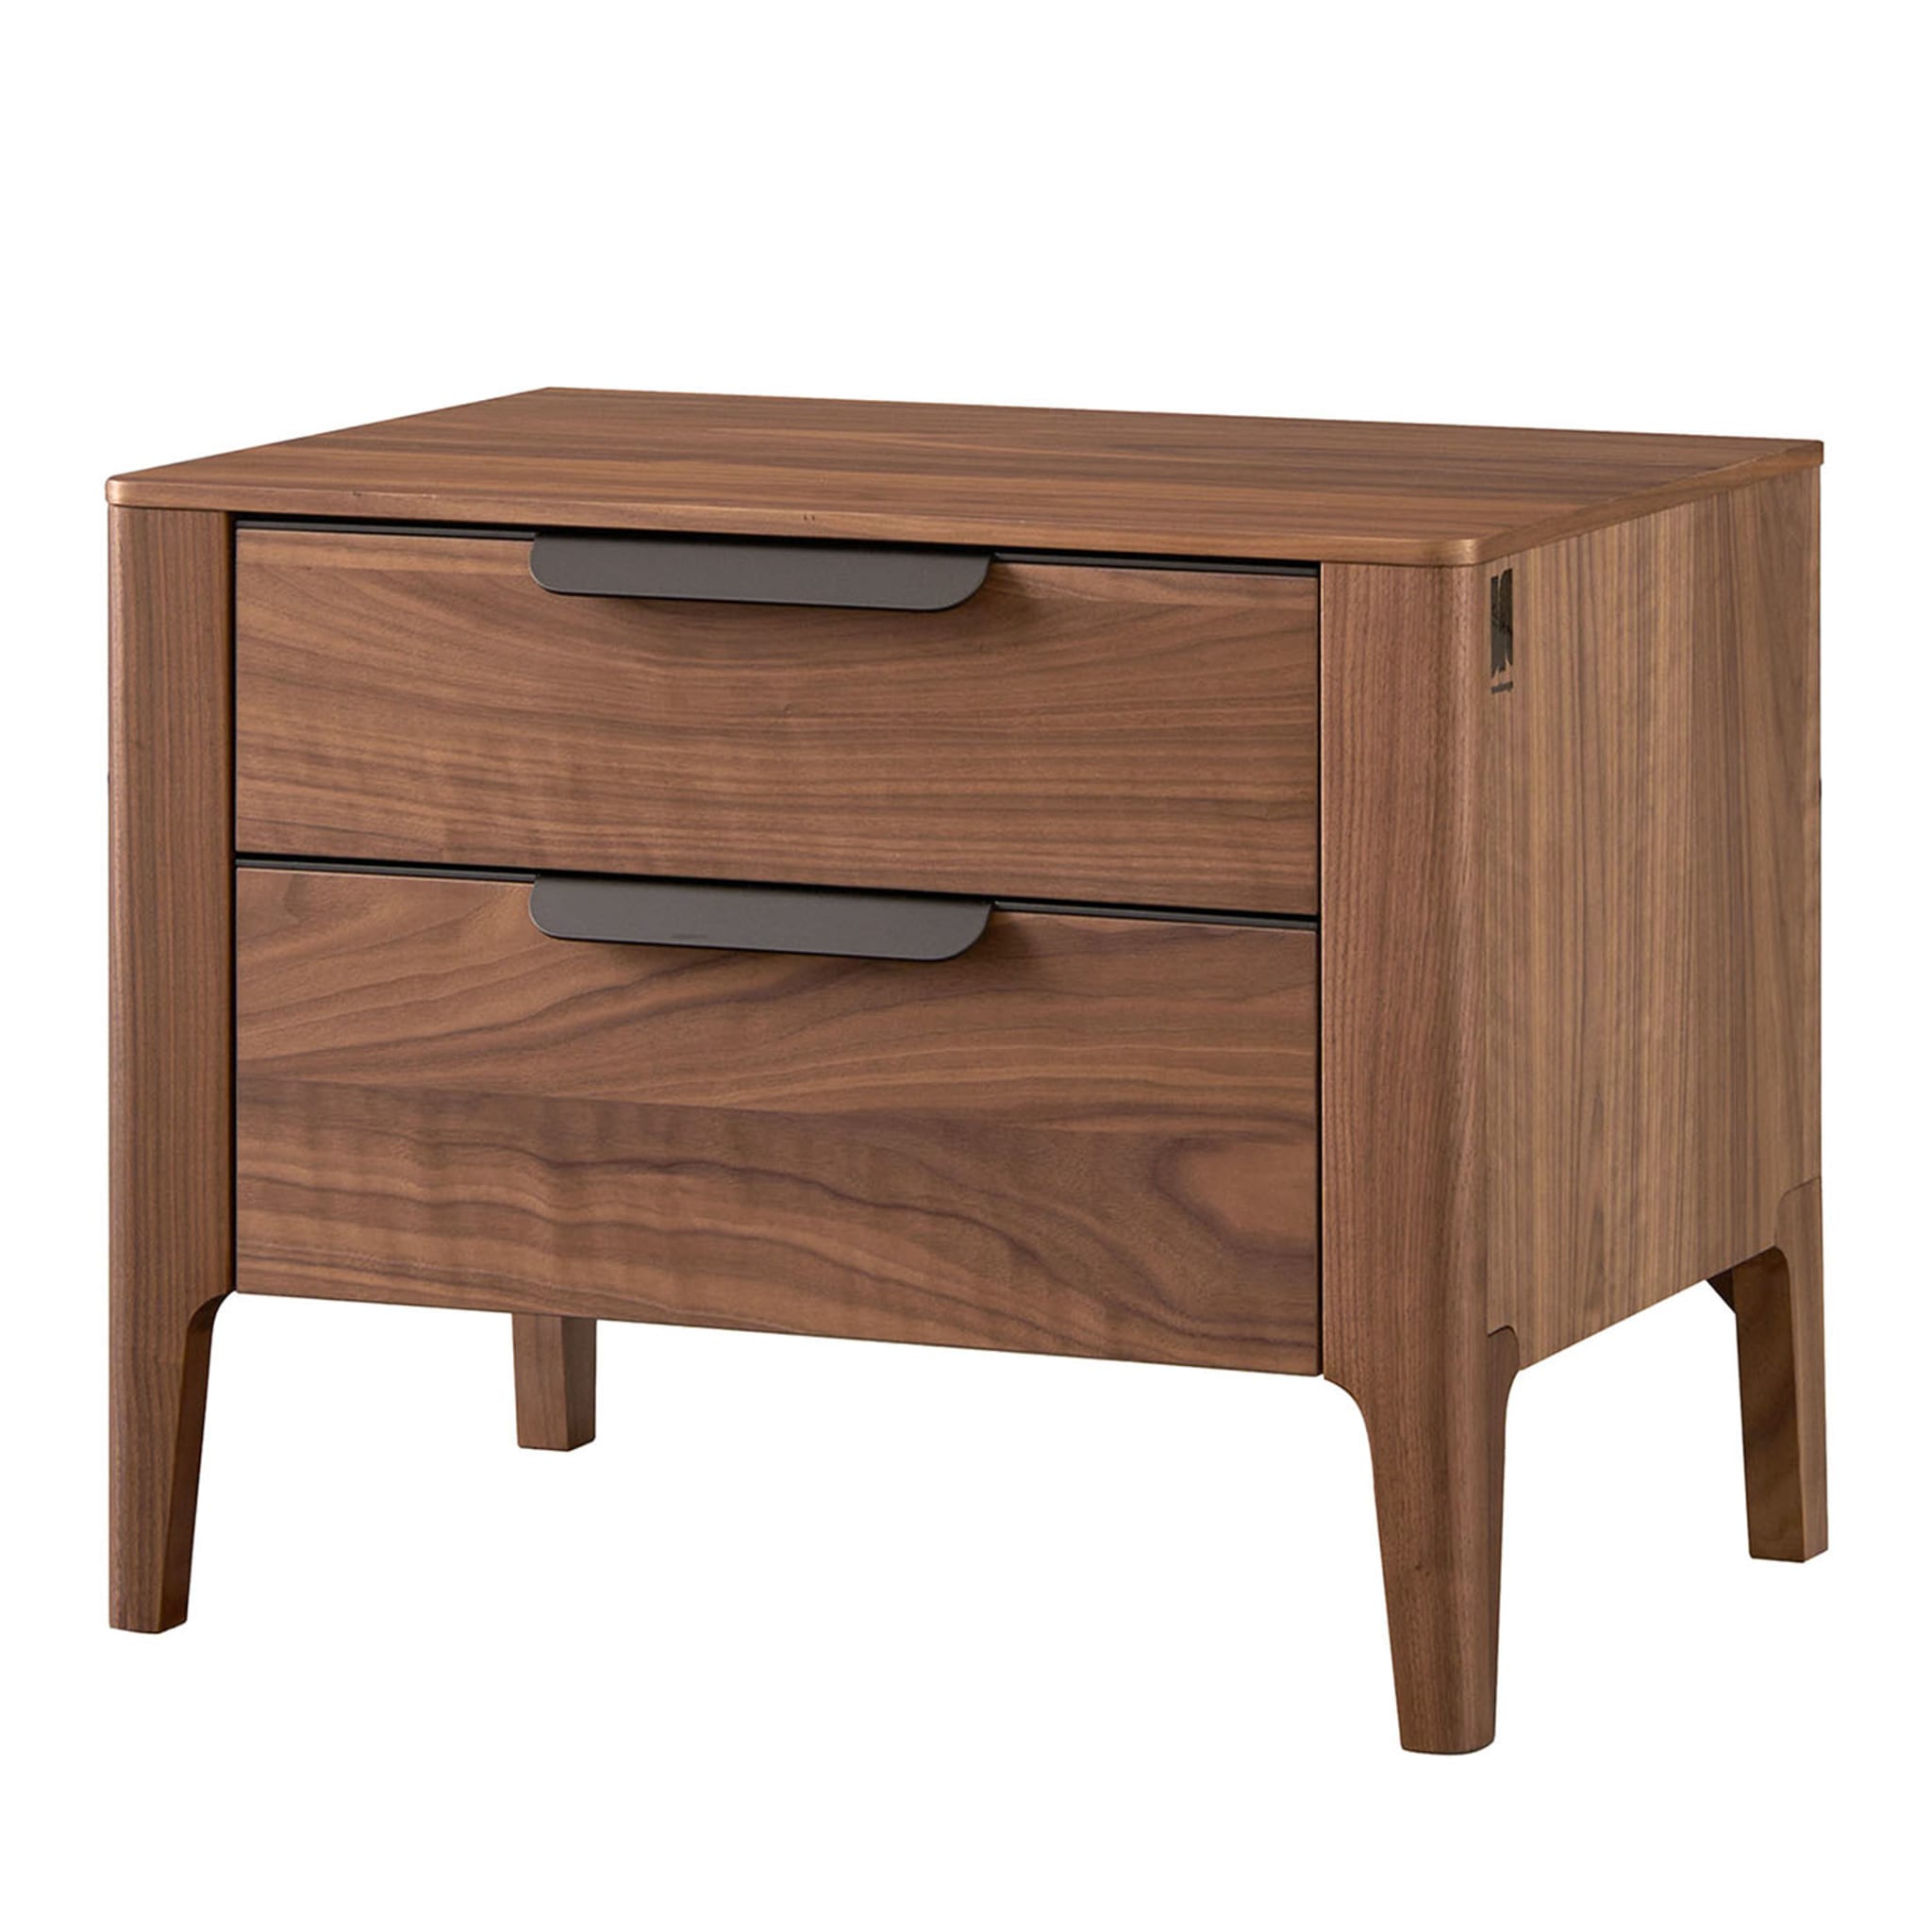 Cannaregio Bedside Table in Canaletto Walnut Wood - Main view